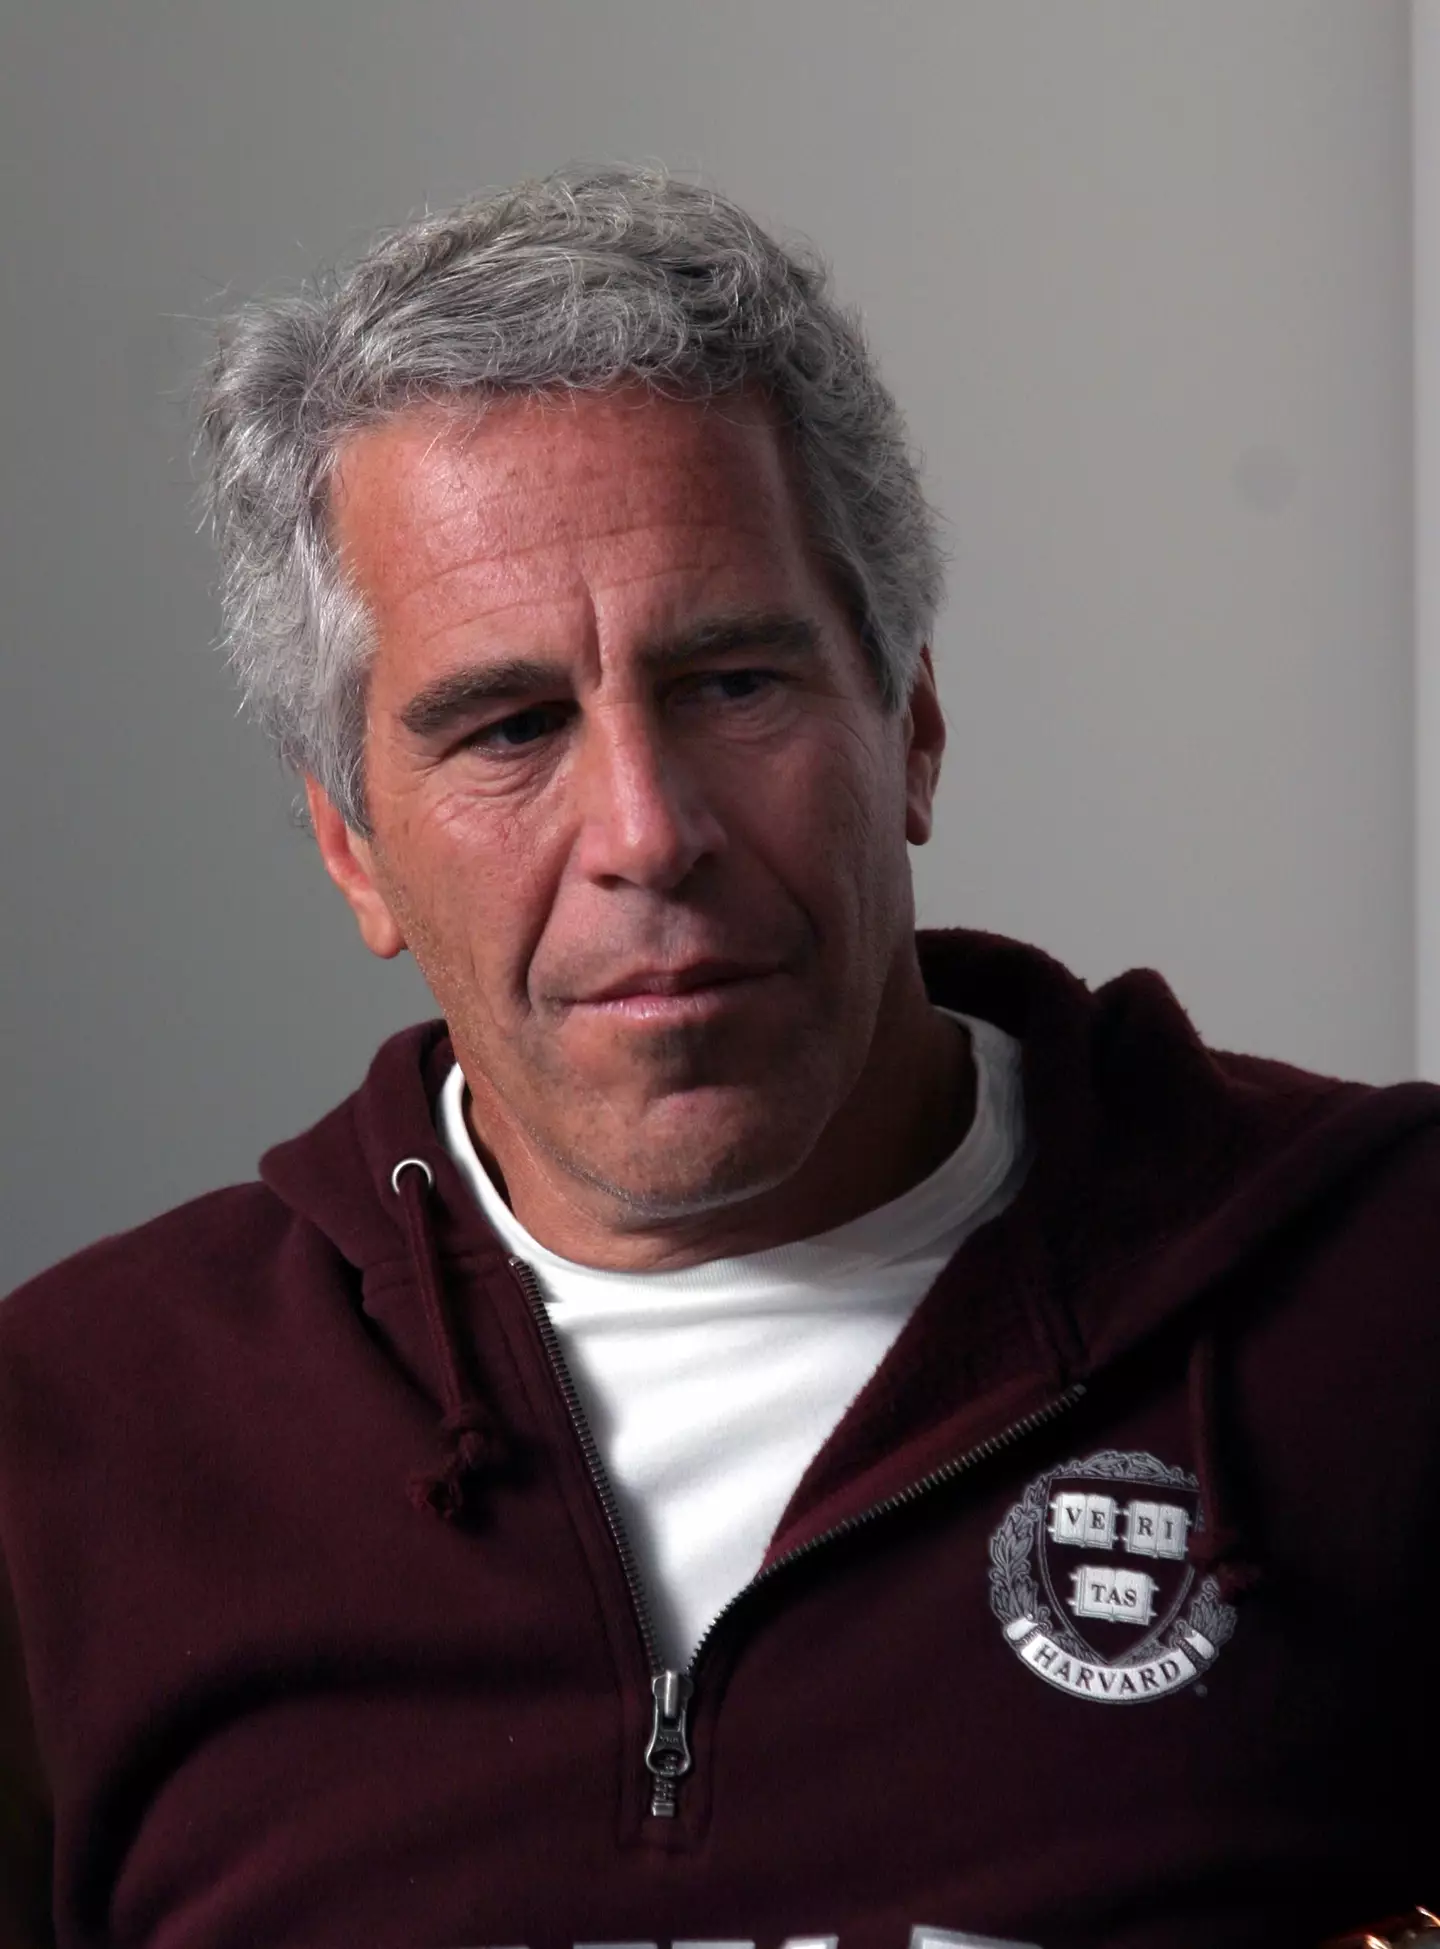 Epstein died in his prison cell while awaiting trial on child sex trafficking charges.